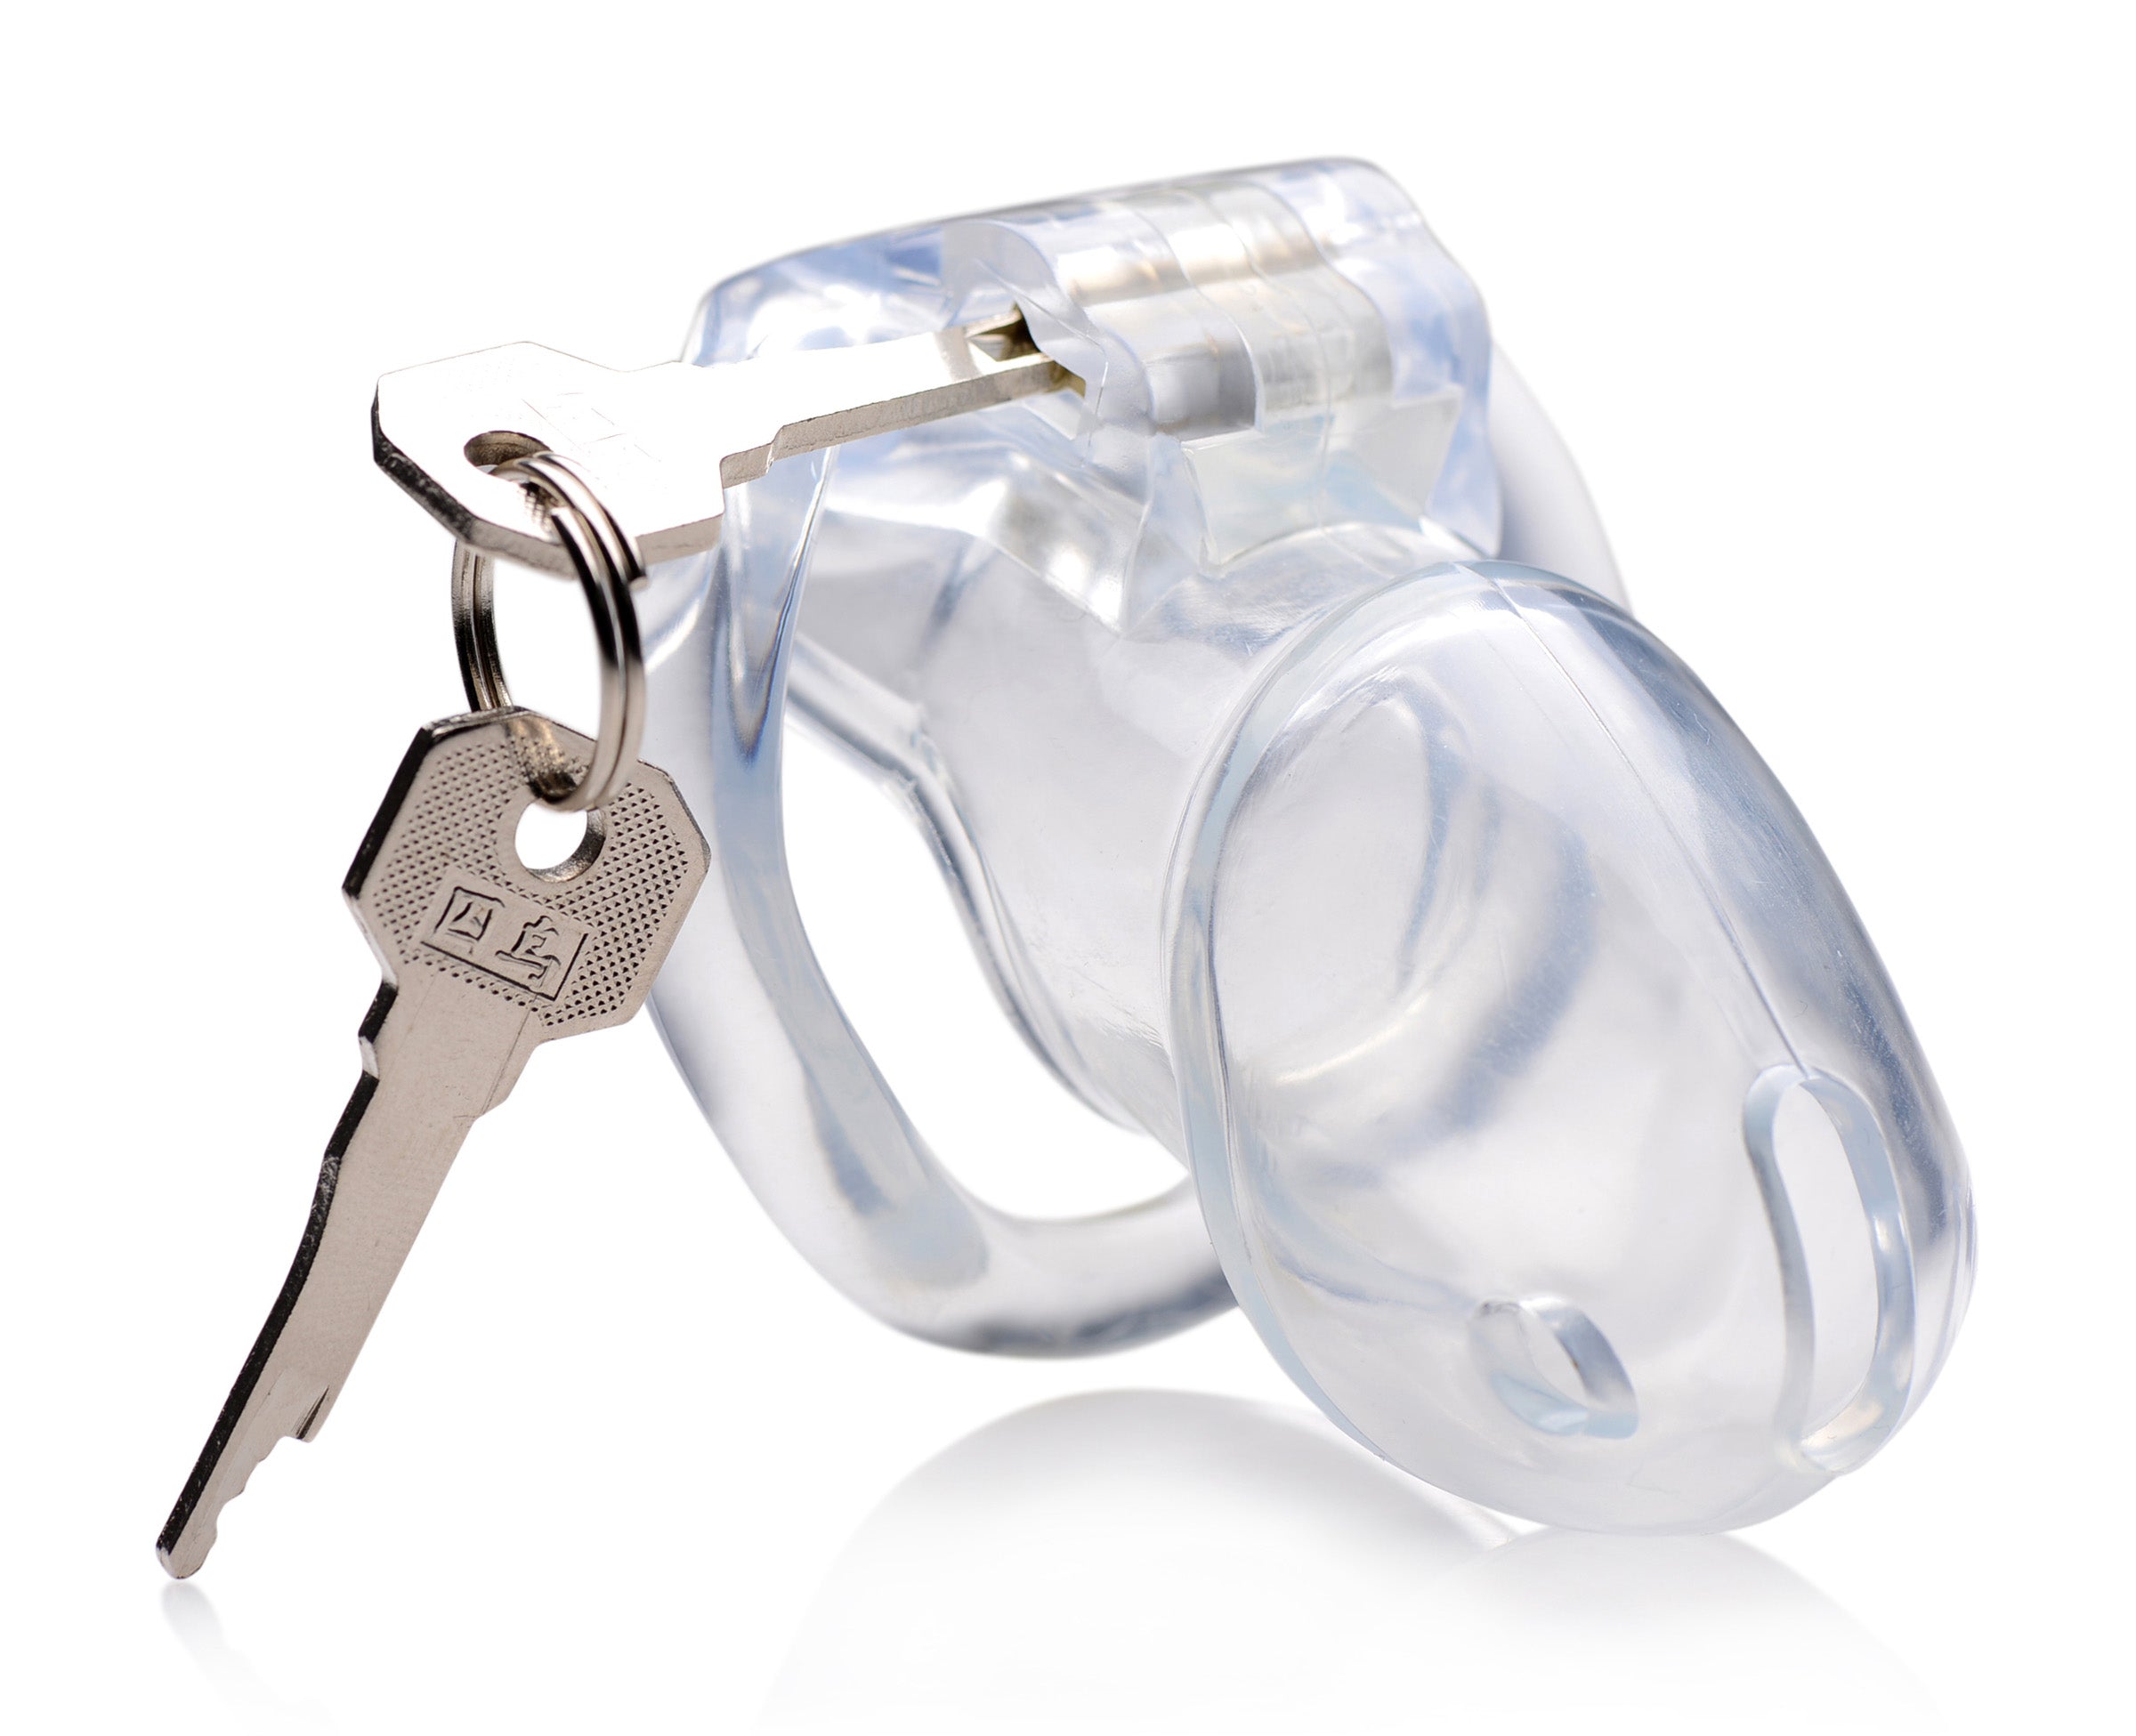 Clear Captor Chastity Cage